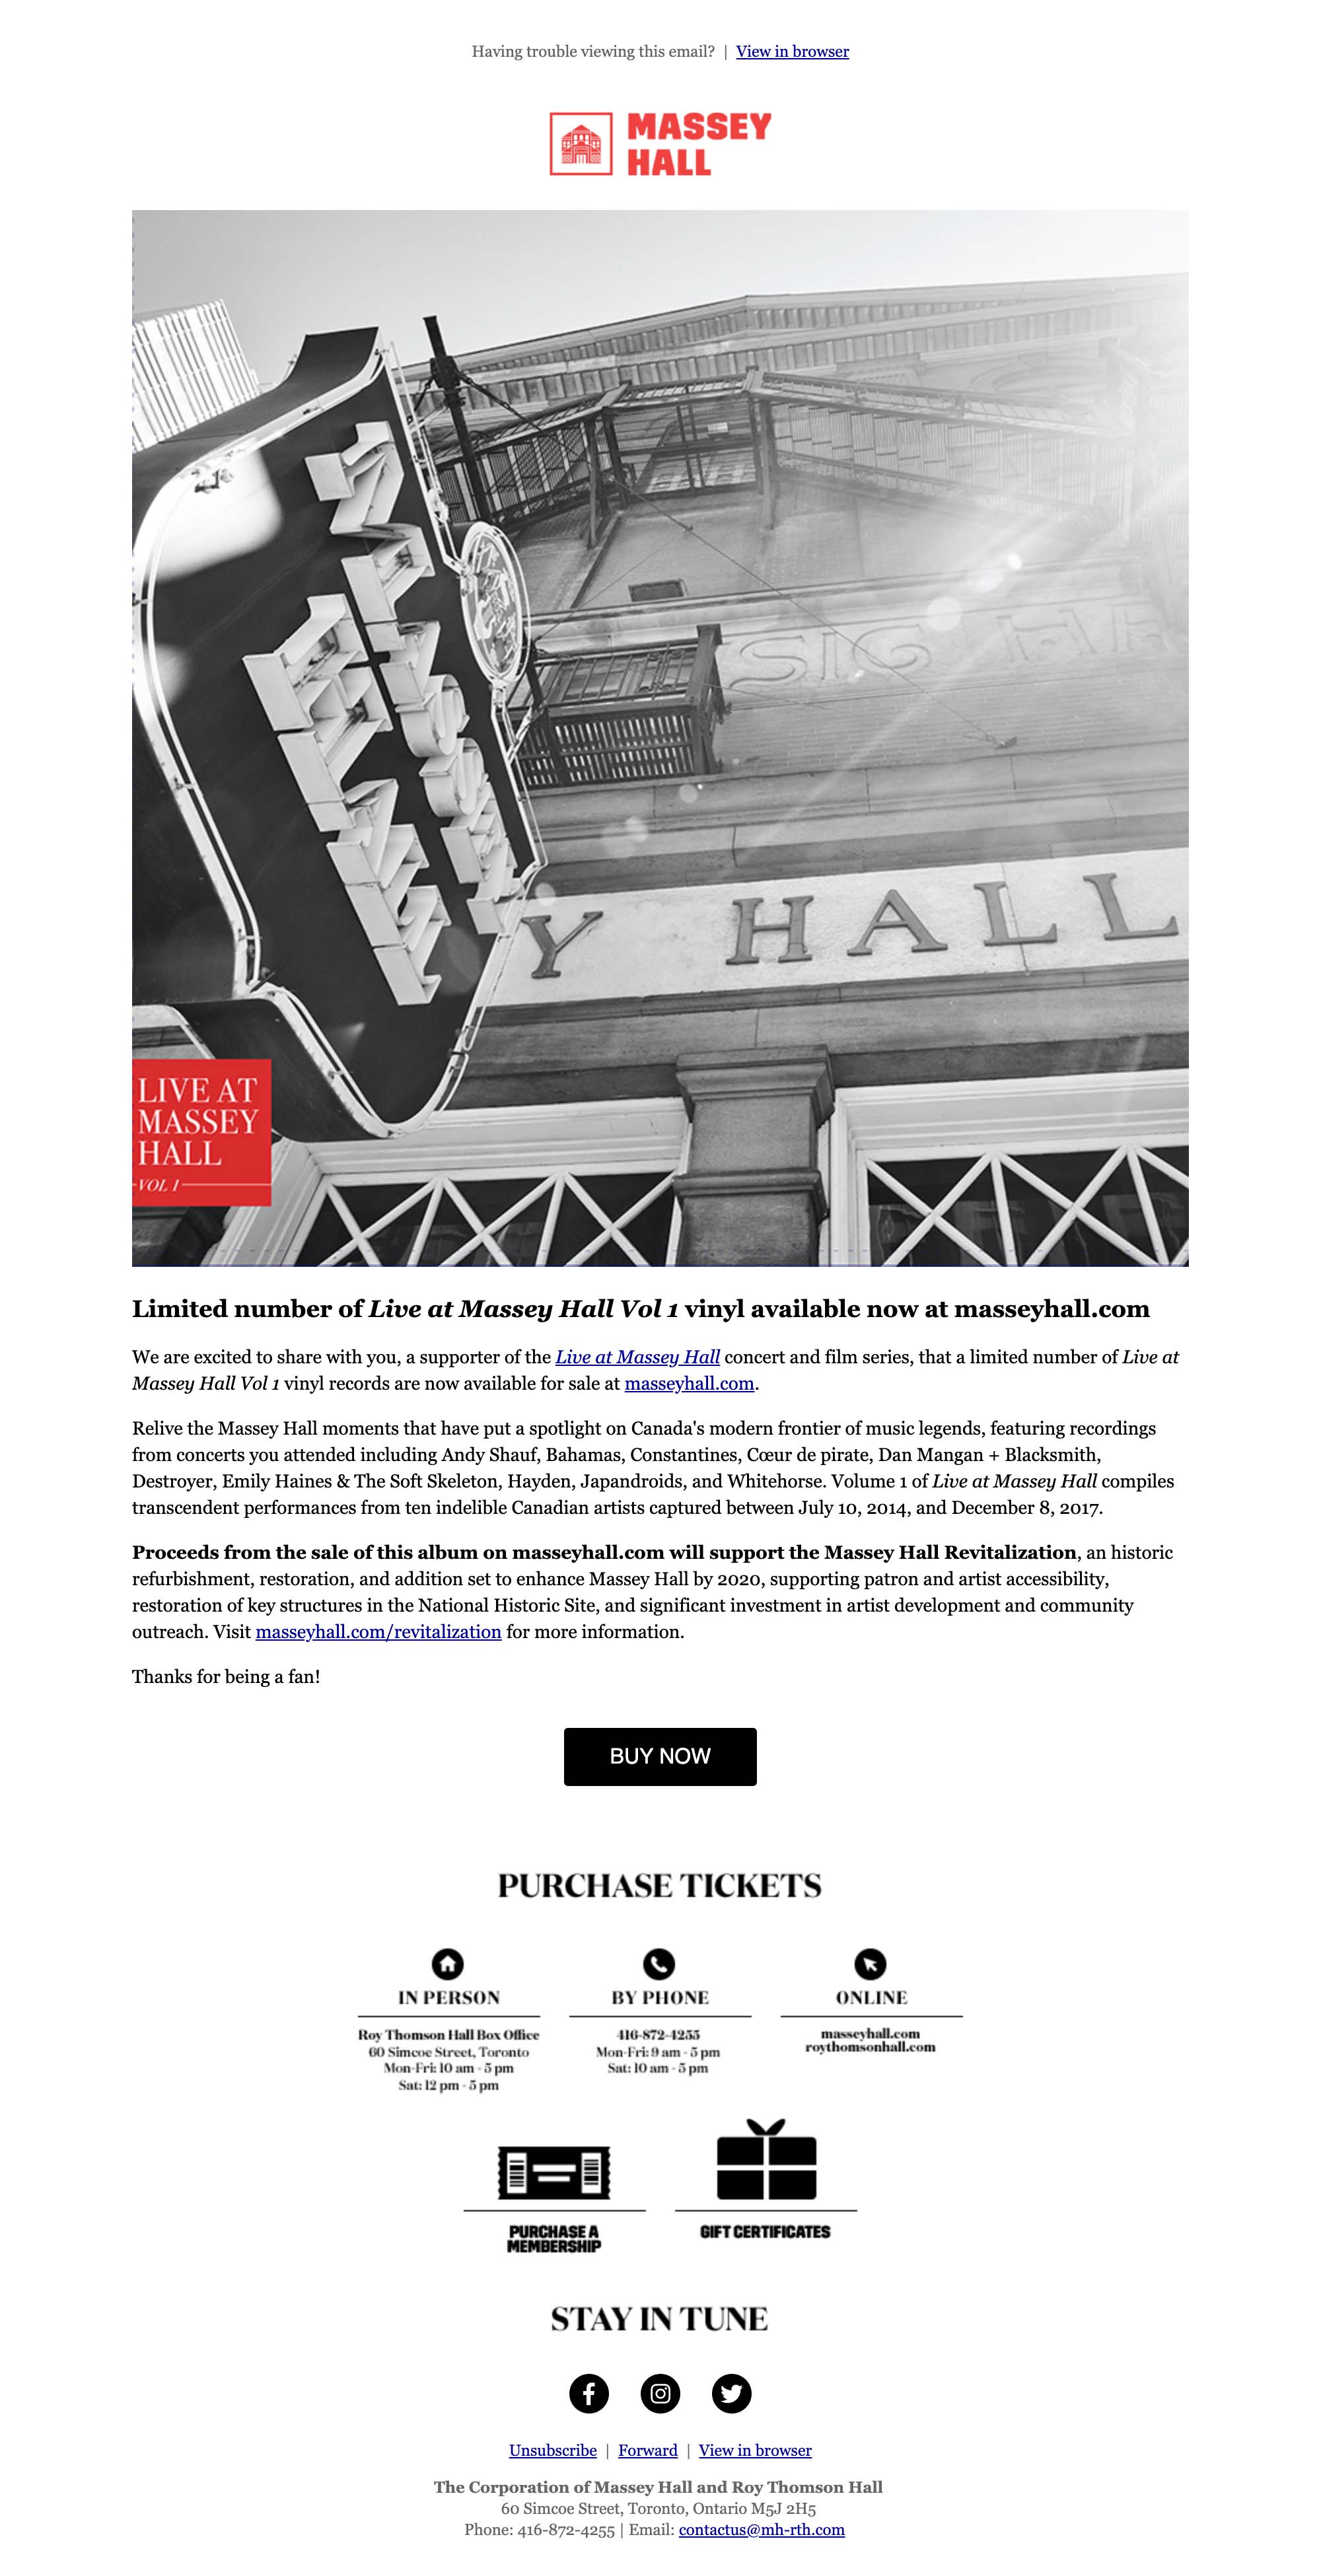 Limited number of Live at Massey Hall Vol 1 vinyl available now at masseyhall.com - desktop view